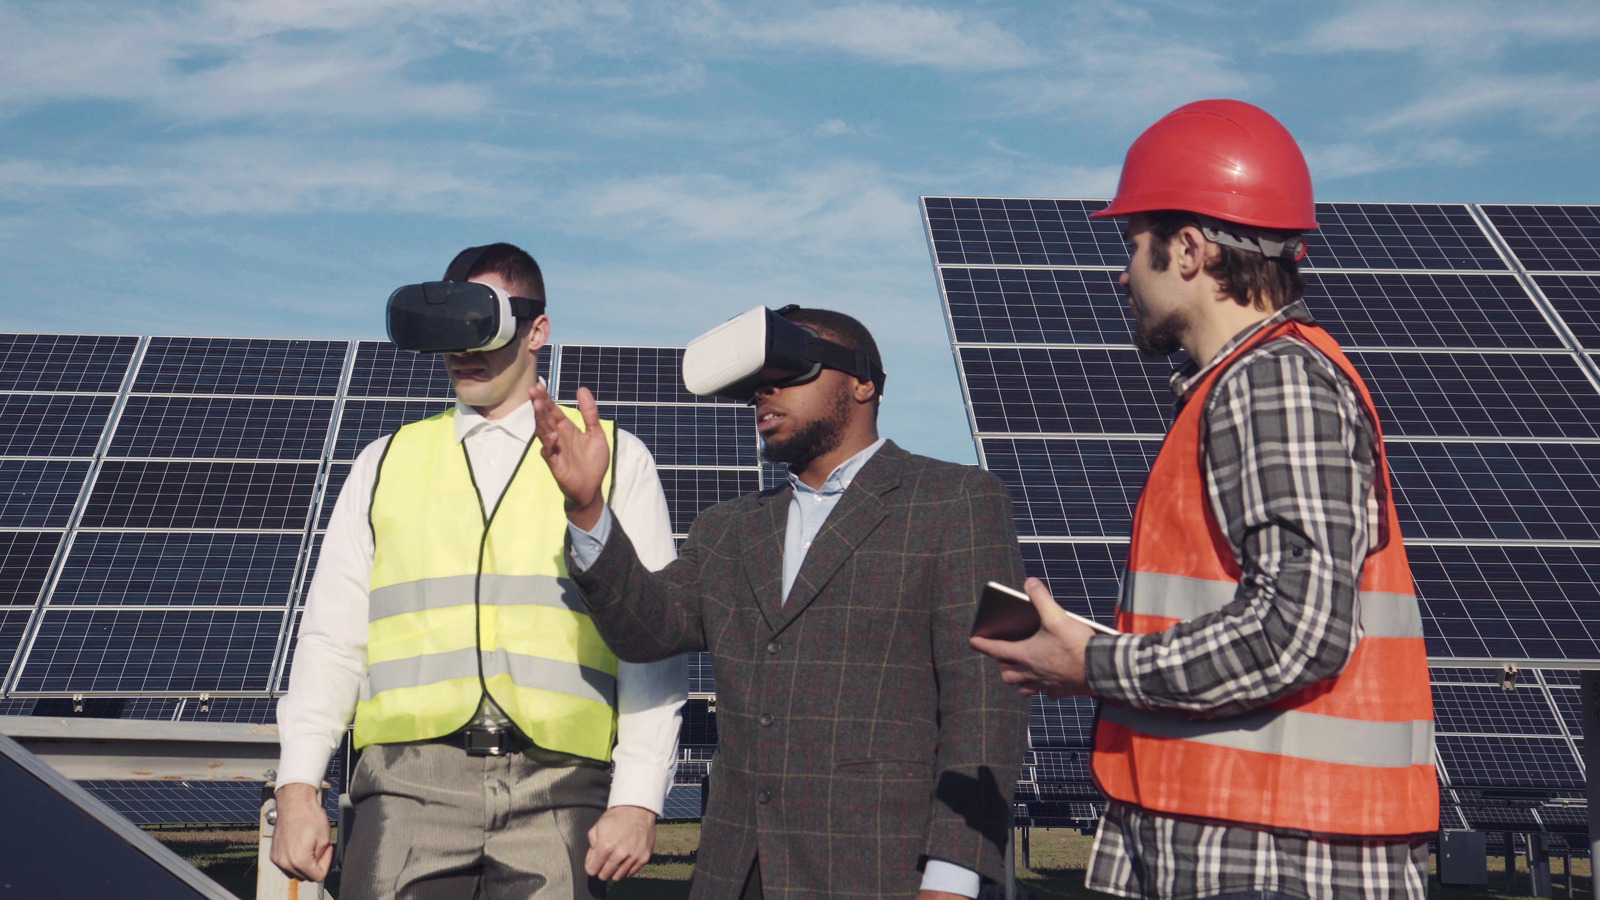 What Is A Way Virtual Reality Can Be Used In The Construction Industry